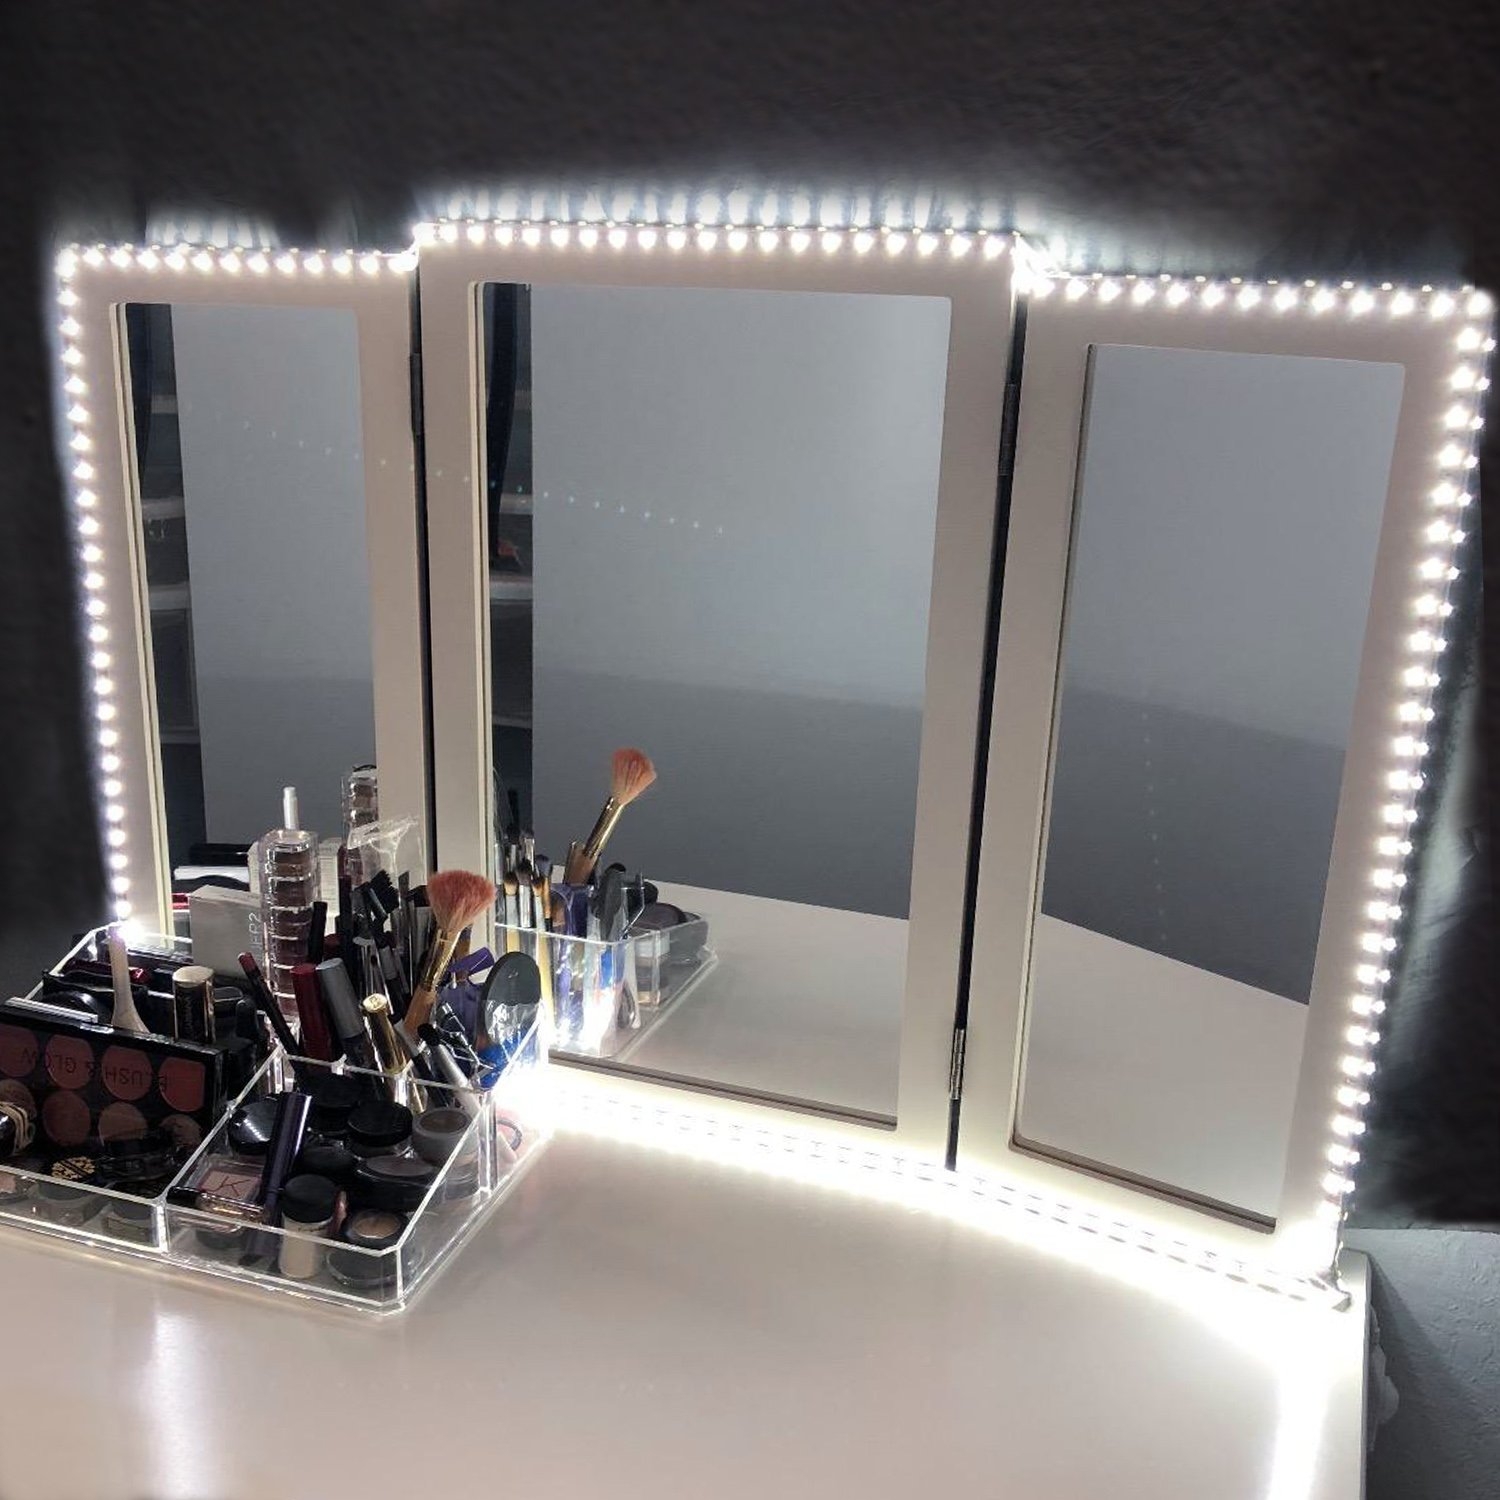 4 Bulb Mirror Lights Suction Cup Installation Dressing Table Battery Powered Majome LED Vanity Make Up Light 